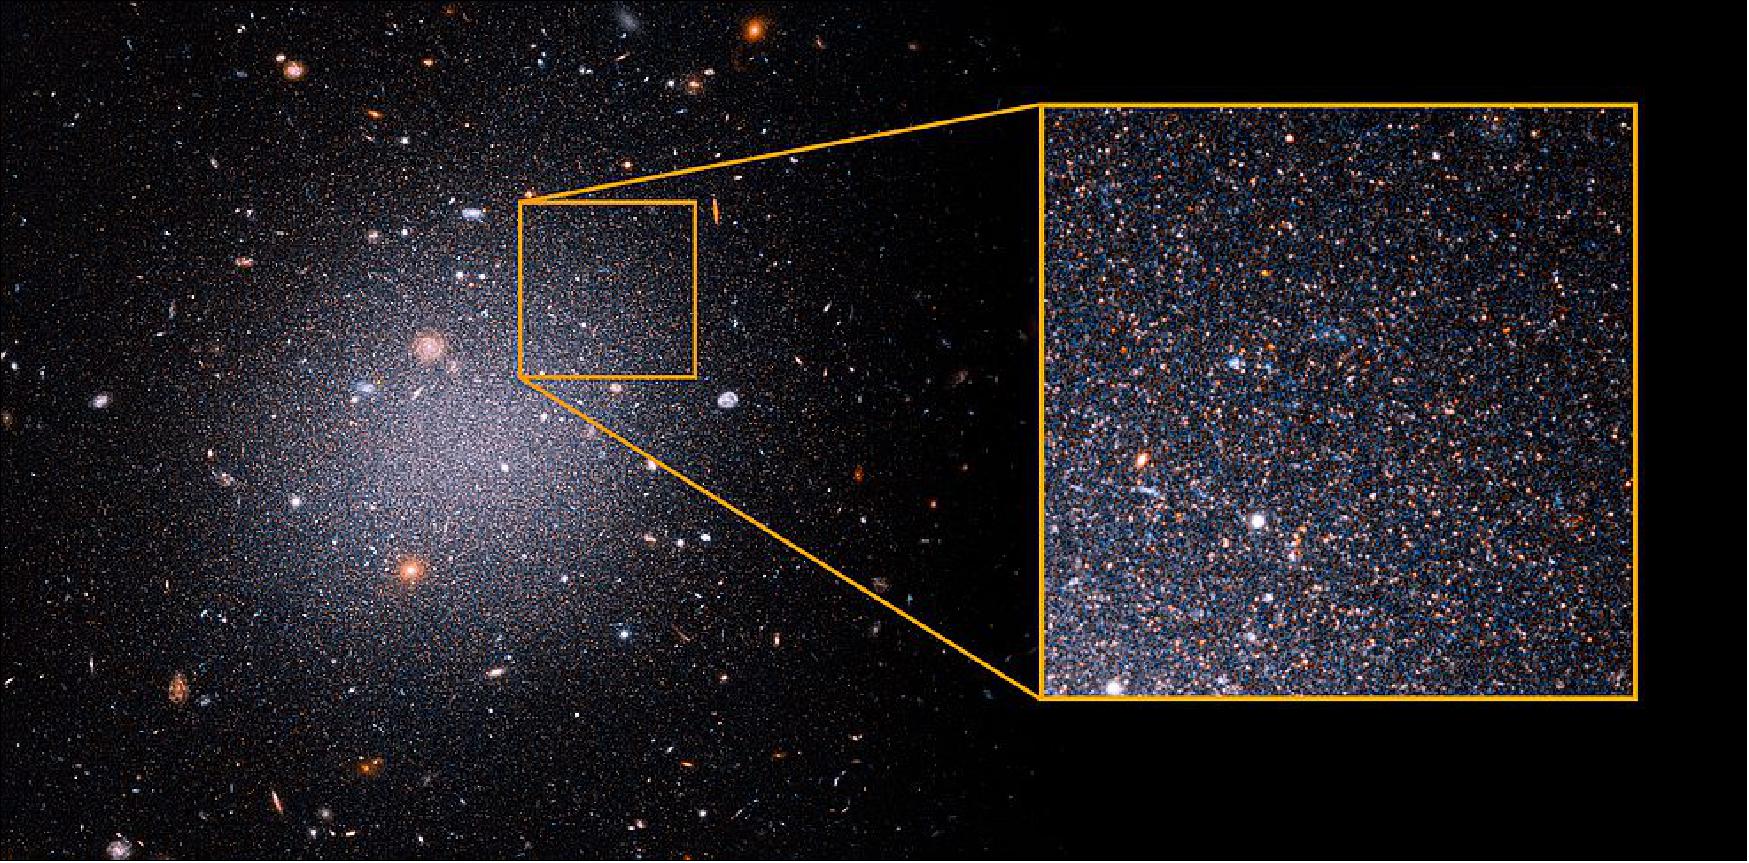 Figure 77: This Hubble Space Telescope image offers a sampling of aging, red stars in the ultra-diffuse galaxy NGC 1052-DF2, or DF2. The galaxy continues to puzzle astronomers because it is lacking dark matter, an invisible form of matter that provides the gravitational glue to hold galaxies together. Precisely establishing the galaxy’s distance form Earth is a step toward solving the mystery. The close-up at right reveals the many aging red giant stars on the outskirts of the galaxy that are used as intergalactic milepost markers. Researchers calculated a more accurate distance to DF2 by using Hubble to observe about 5,400 red giants. These older stars all reach the same peak brightness, so they are reliable yardsticks to measure distances to galaxies. The research team estimates that DF2 is 72 million light-years from Earth. They say the distance measurement solidifies their claim that DF2 lacks dark matter. The galaxy contains at most 1/400th the amount of dark matter that the astronomers had expected, based on theory and observations of many other galaxies. Called an ultra-diffuse galaxy, the galactic oddball is almost as wide as the Milky Way, but it contains only 1/200th the number of stars as our galaxy. The ghostly galaxy doesn't appear to have a noticeable central region, spiral arms, or a disk. The observations were taken between December 2020 and March 2021 with Hubble's Advanced Camera for Surveys [image credits: SCIENCE: NASA, ESA, STScI, Zili Shen (Yale), Pieter van Dokkum (Yale), Shany Danieli (IAS) IMAGE PROCESSING: Alyssa Pagan (STScI)] 82)